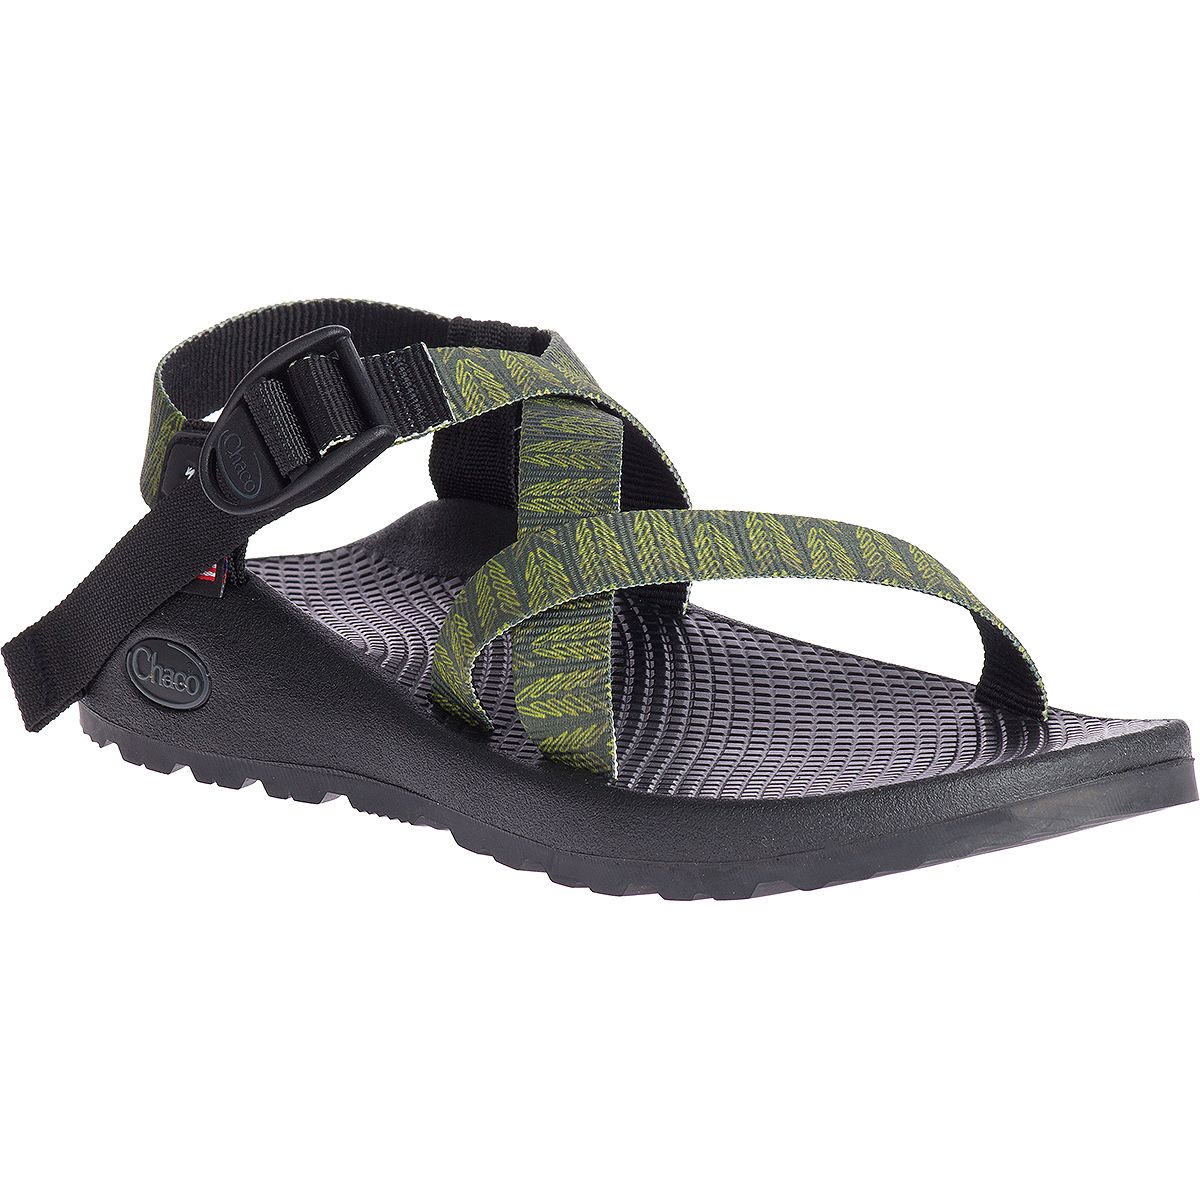 Chaco Z/1 Classic Erica Lang Artist Collection Sandal - Women's - Footwear